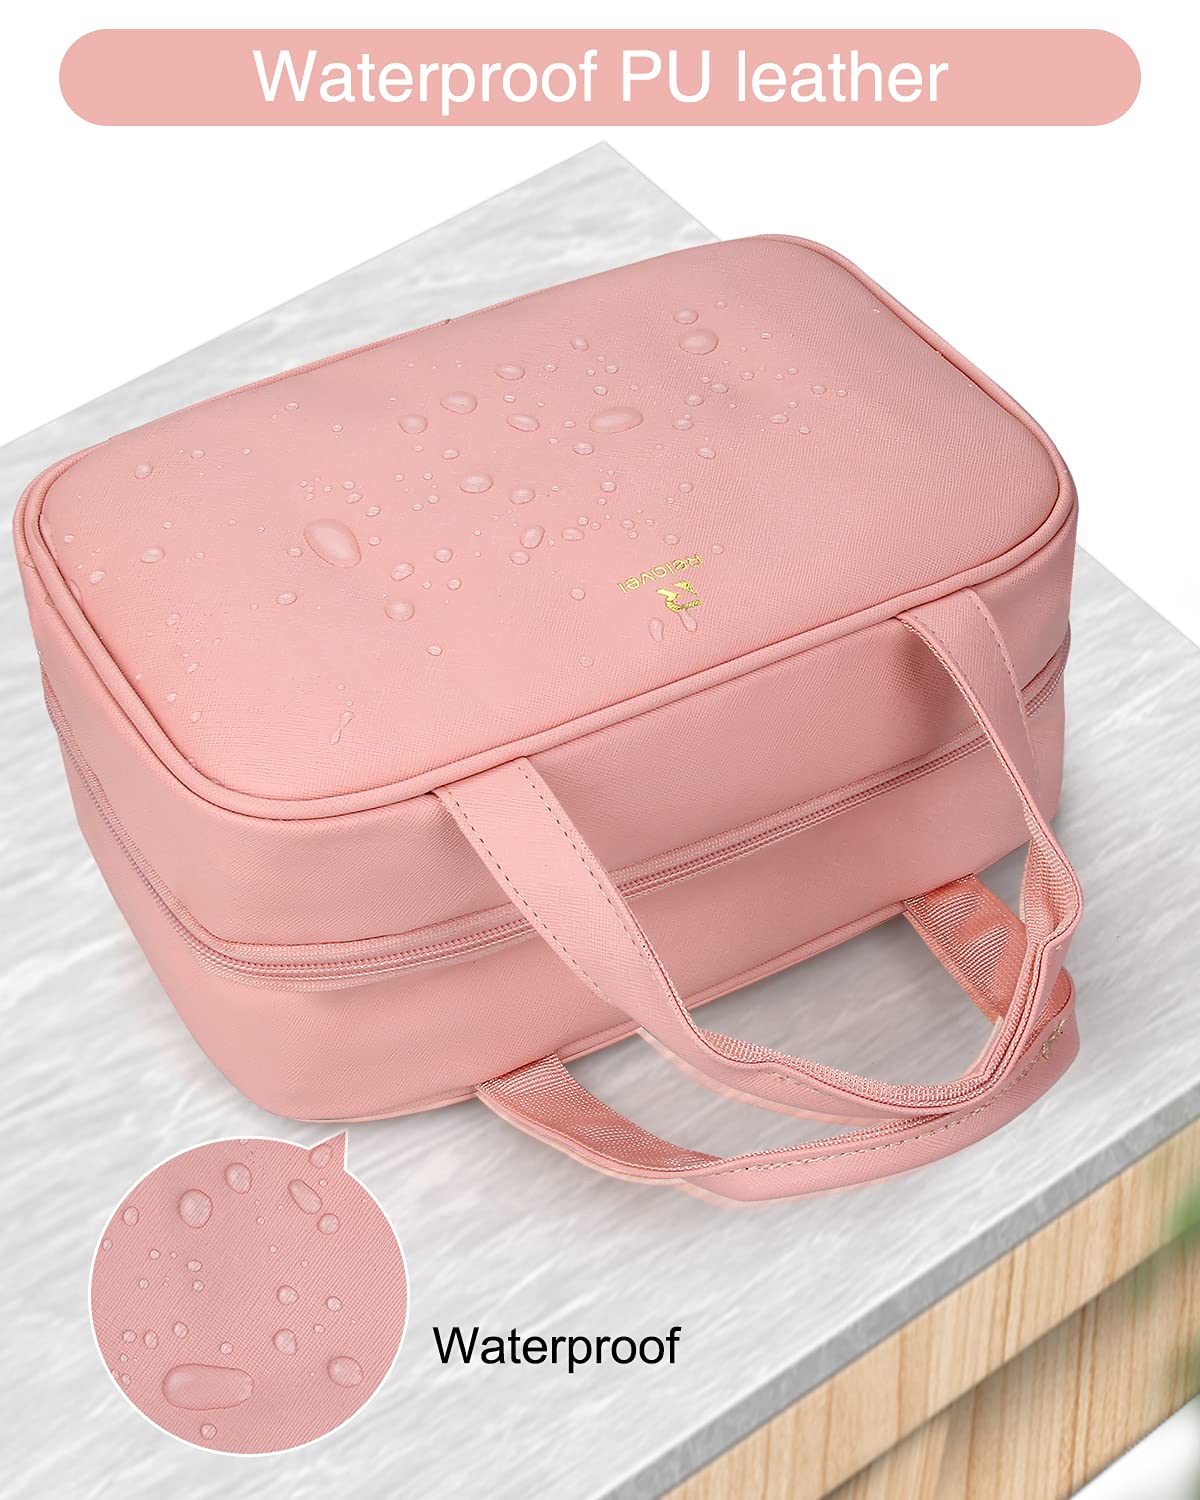 Hanging Toiletry Bag, Travel Toiletry Bag for Women Bathroom Makeup Bag, Large Pink Cosmetic Travel Bag Leather Waterproof for Accessories,Toiletries, Full Sized Container, Hygiene